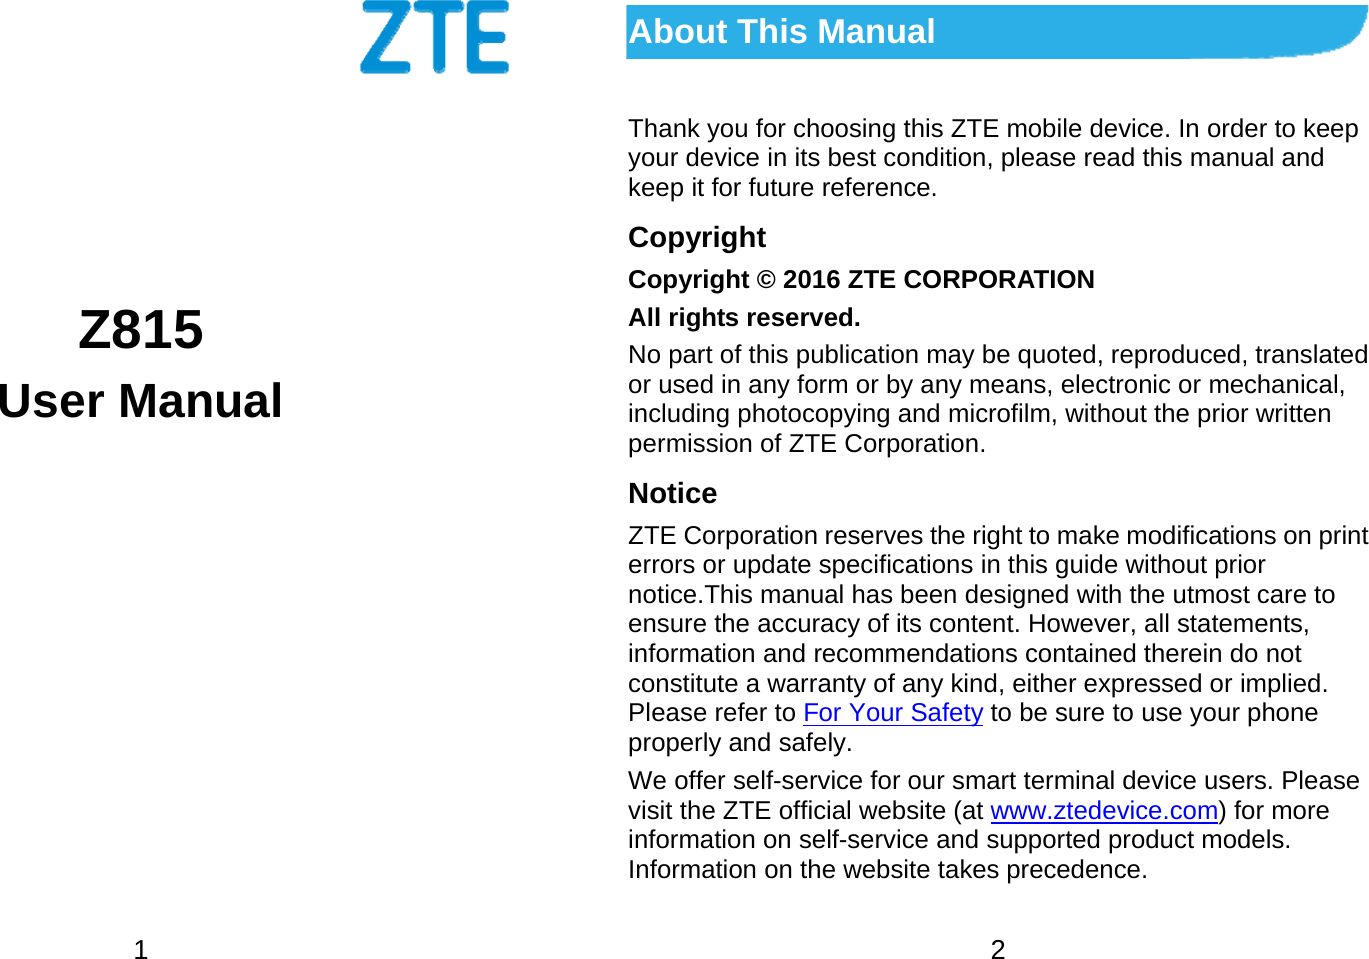  1        Z815 User Manual    2 About This Manual Thank you for choosing this ZTE mobile device. In order to keep your device in its best condition, please read this manual and keep it for future reference. Copyright Copyright © 2016 ZTE CORPORATION All rights reserved. No part of this publication may be quoted, reproduced, translated or used in any form or by any means, electronic or mechanical, including photocopying and microfilm, without the prior written permission of ZTE Corporation. Notice ZTE Corporation reserves the right to make modifications on print errors or update specifications in this guide without prior notice.This manual has been designed with the utmost care to ensure the accuracy of its content. However, all statements, information and recommendations contained therein do not constitute a warranty of any kind, either expressed or implied. Please refer to For Your Safety to be sure to use your phone properly and safely. We offer self-service for our smart terminal device users. Please visit the ZTE official website (at www.ztedevice.com) for more information on self-service and supported product models. Information on the website takes precedence. 